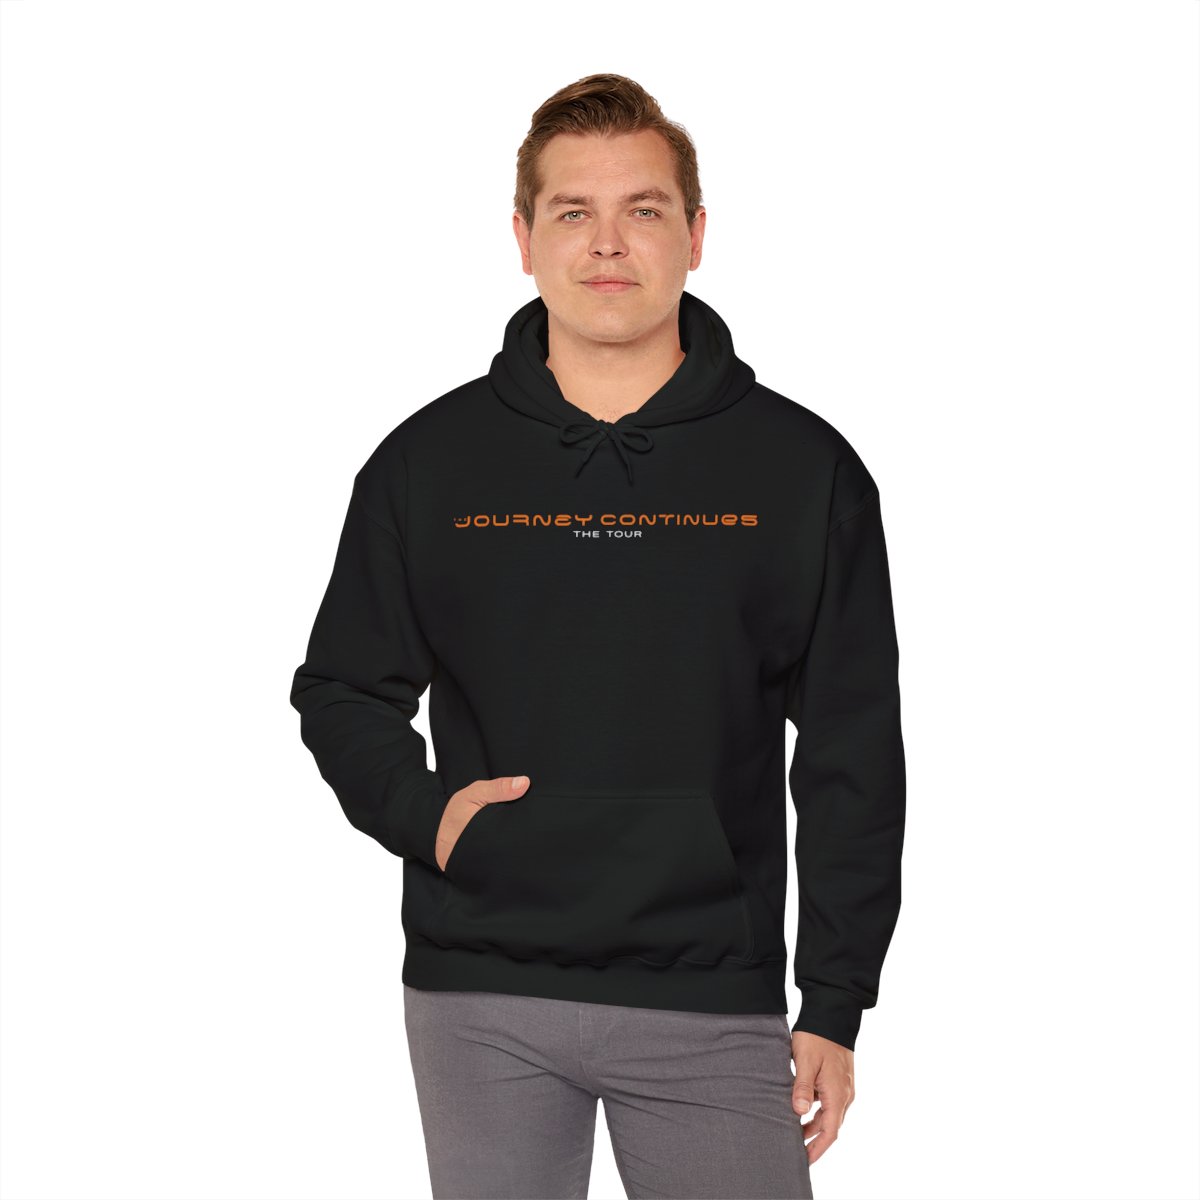 The Journey Continues Tour Hoodie product thumbnail image